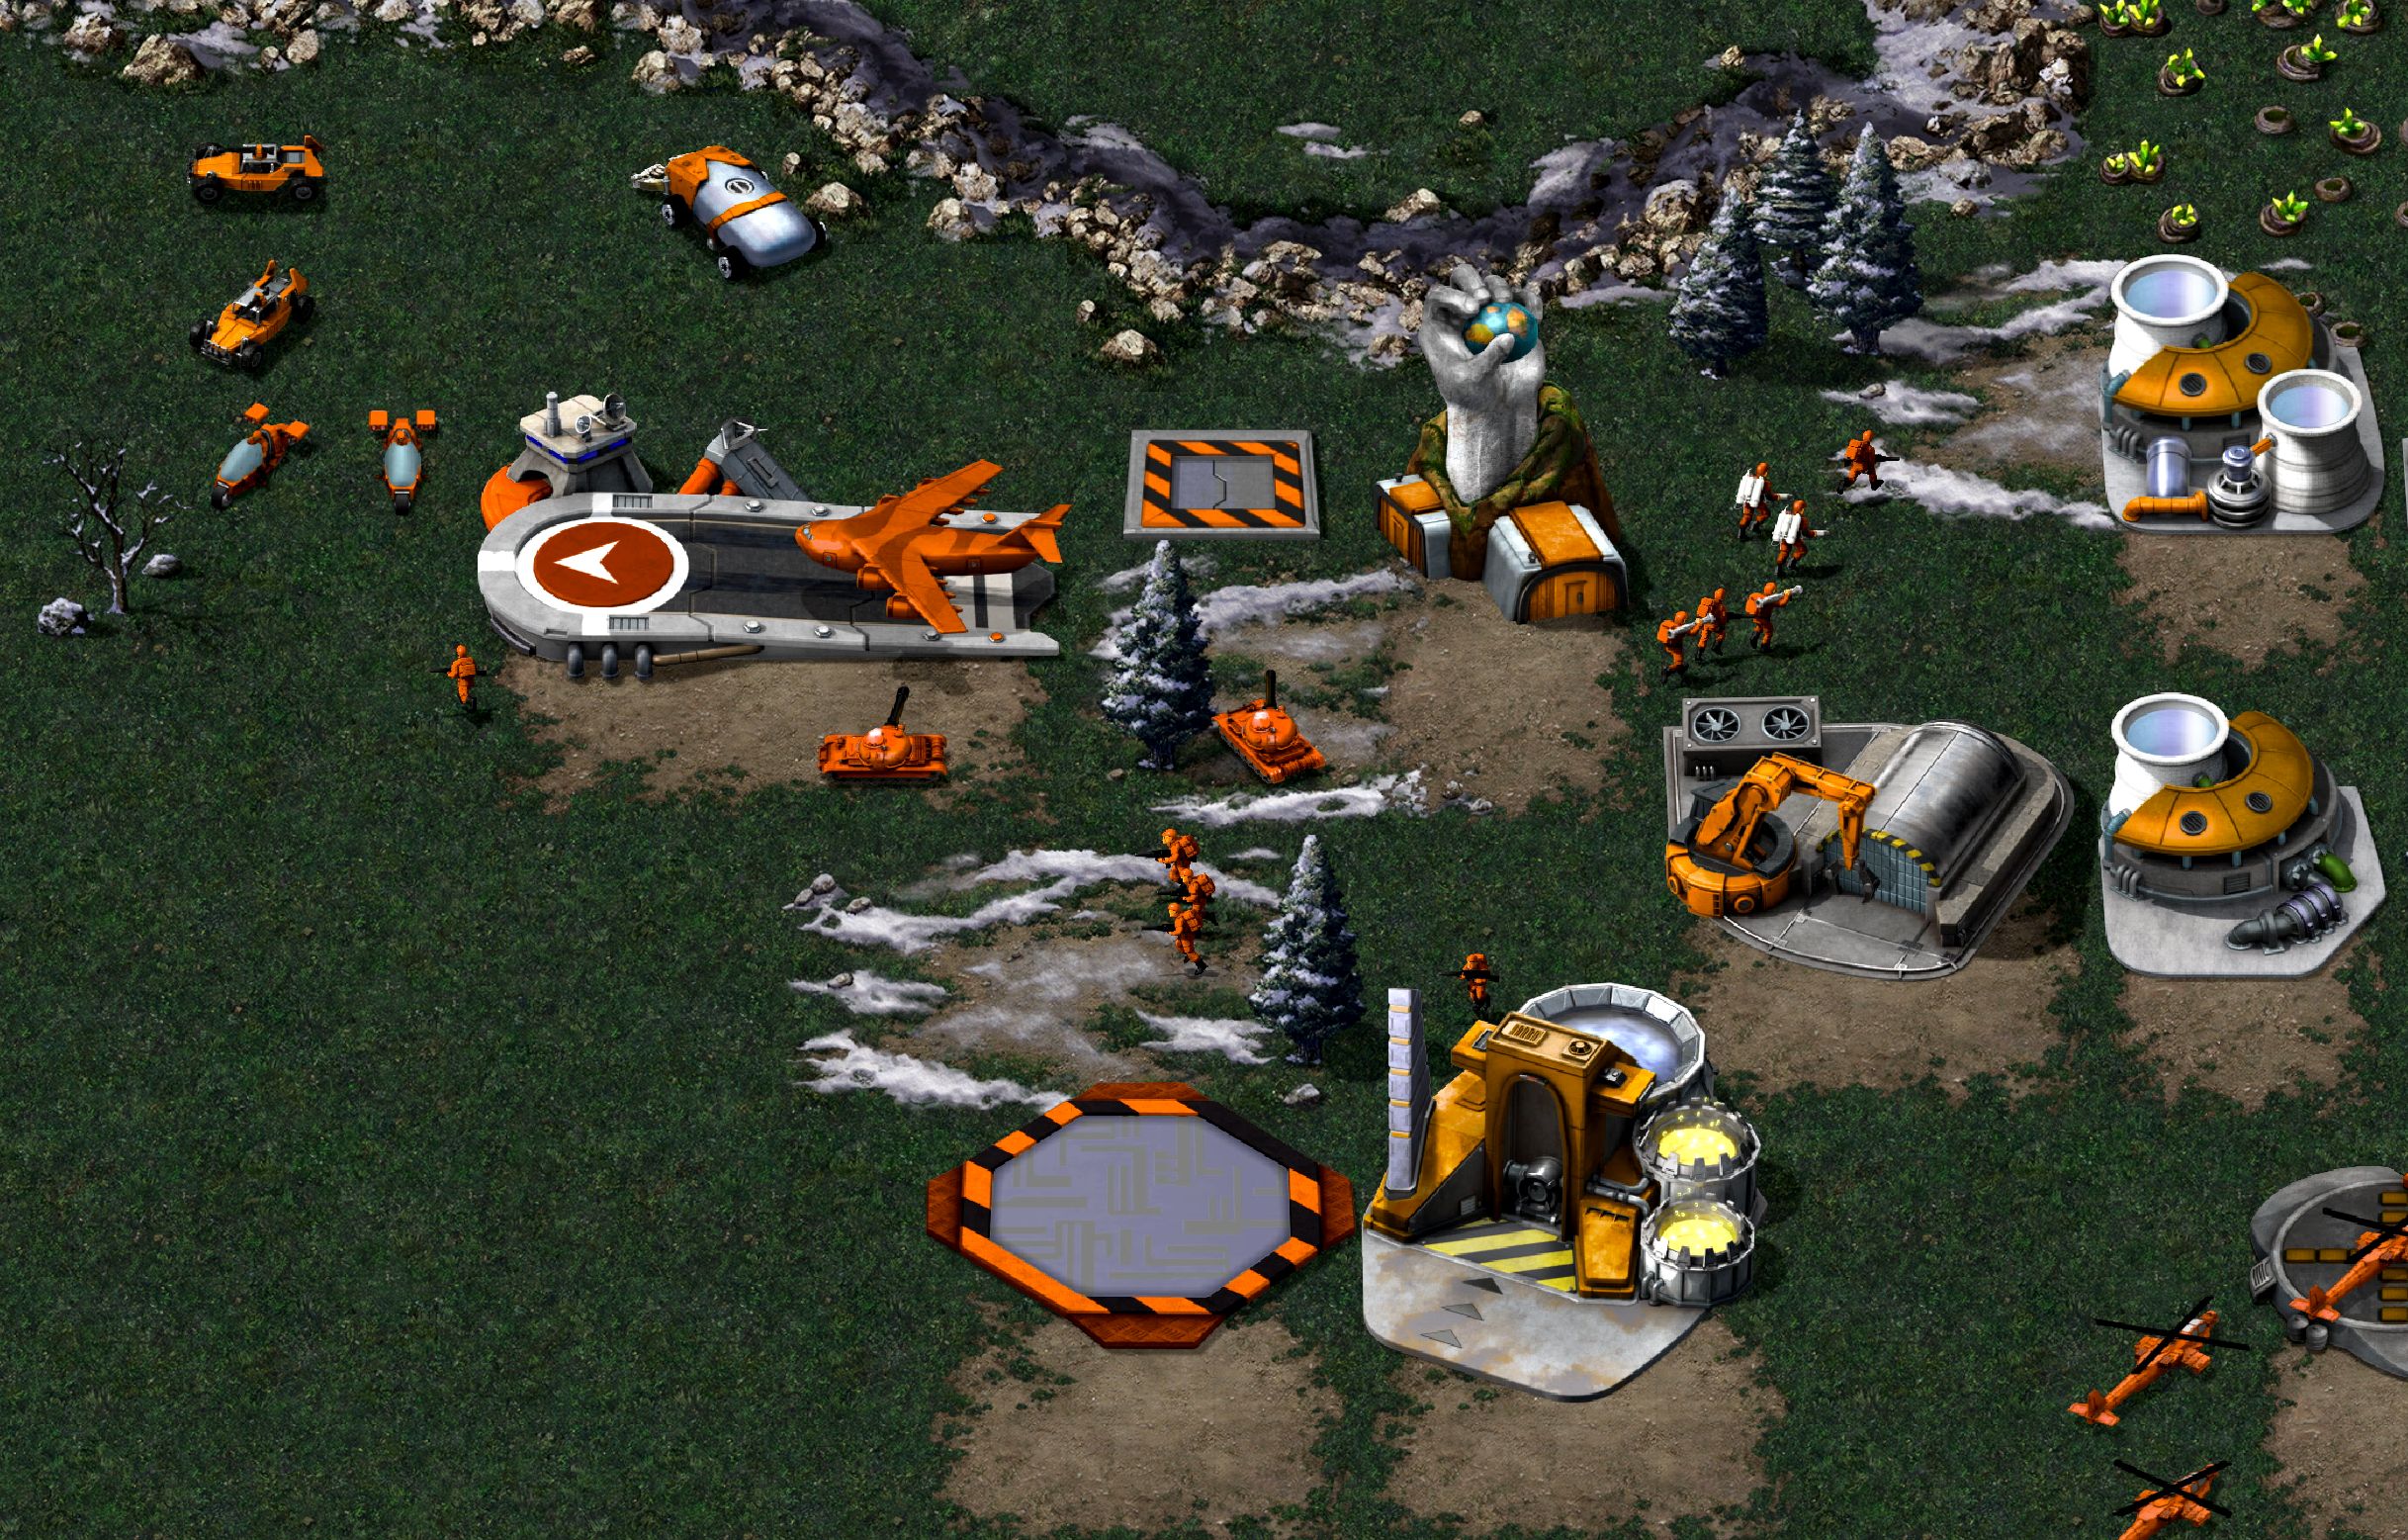 Command and conquer remastered. Red Alert 2 ремастер. Command Conquer Remastered collection 2020. Red Alert 2020 Remastered.